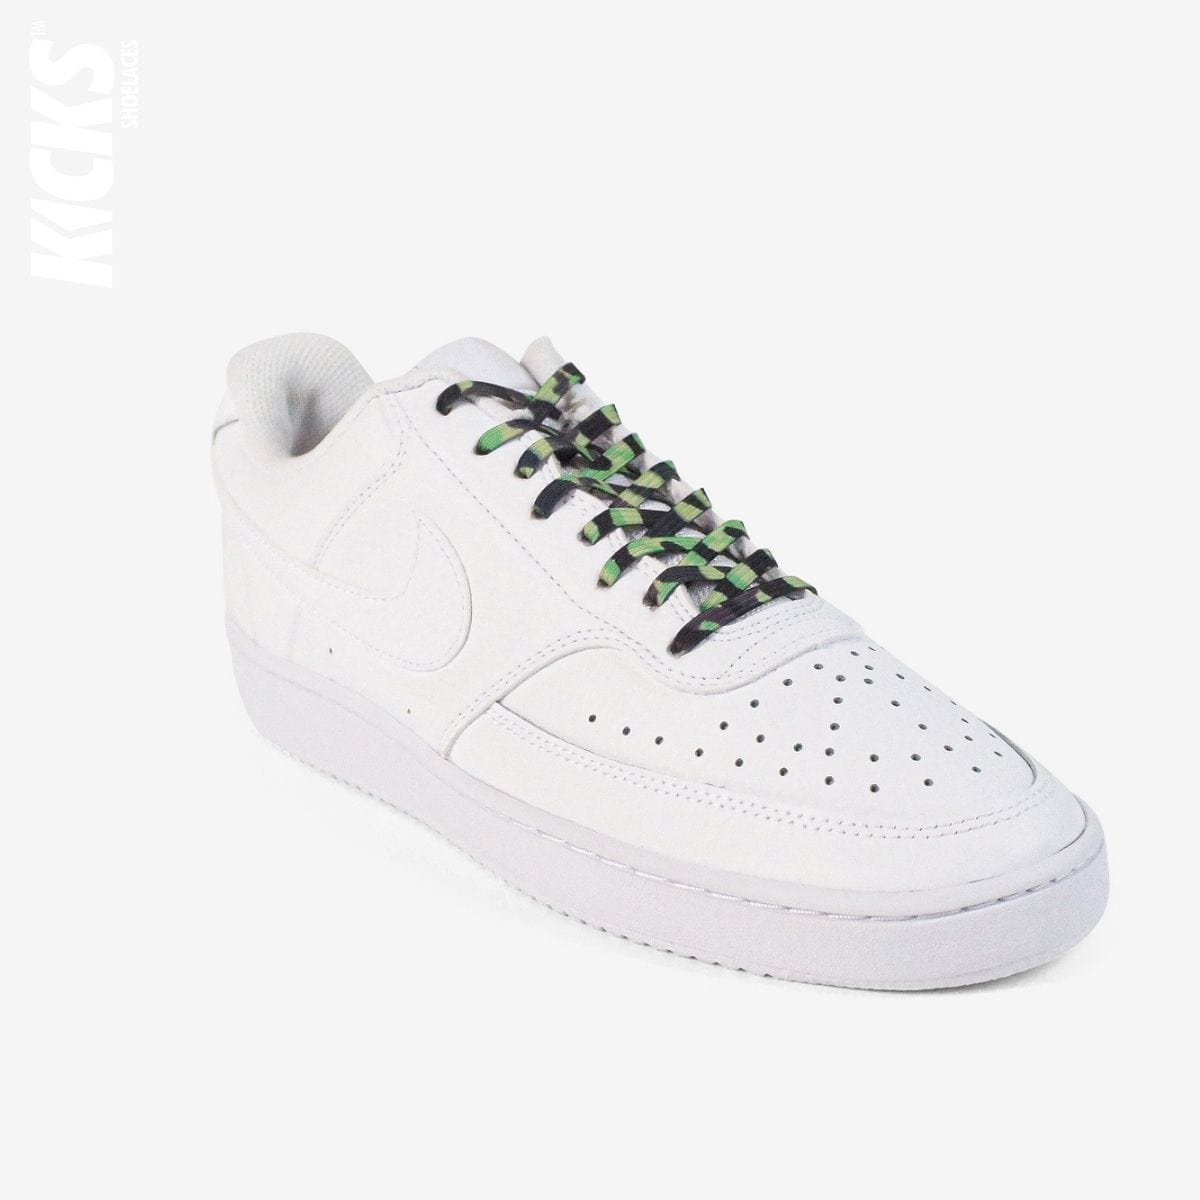 elastic-no-tie-shoelaces-with-black-green-camo-laces-on-nike-white-sneakers